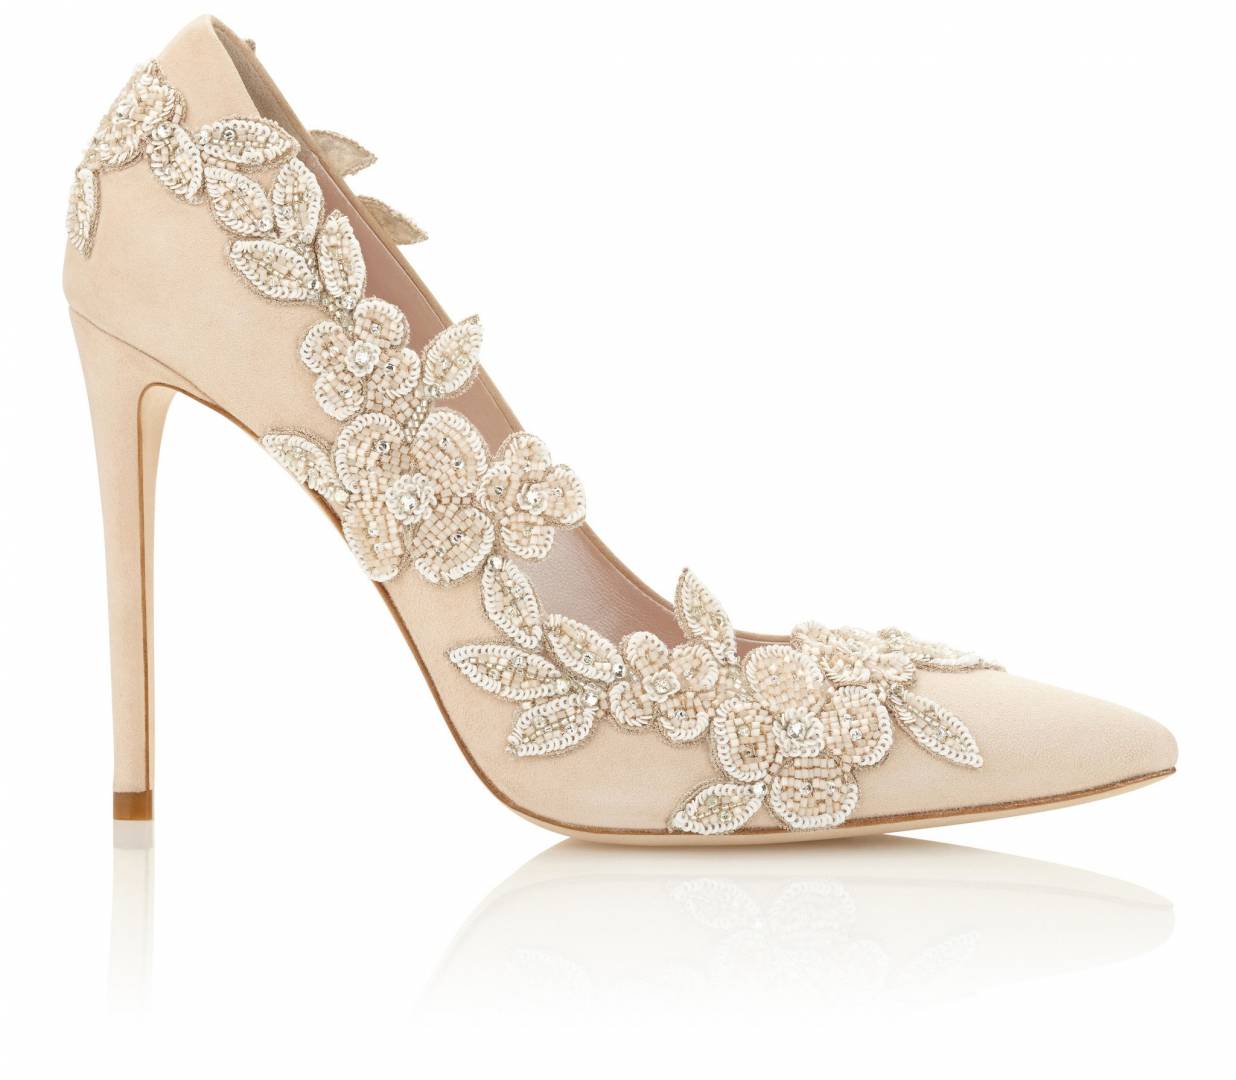 The best luxury wedding shoes